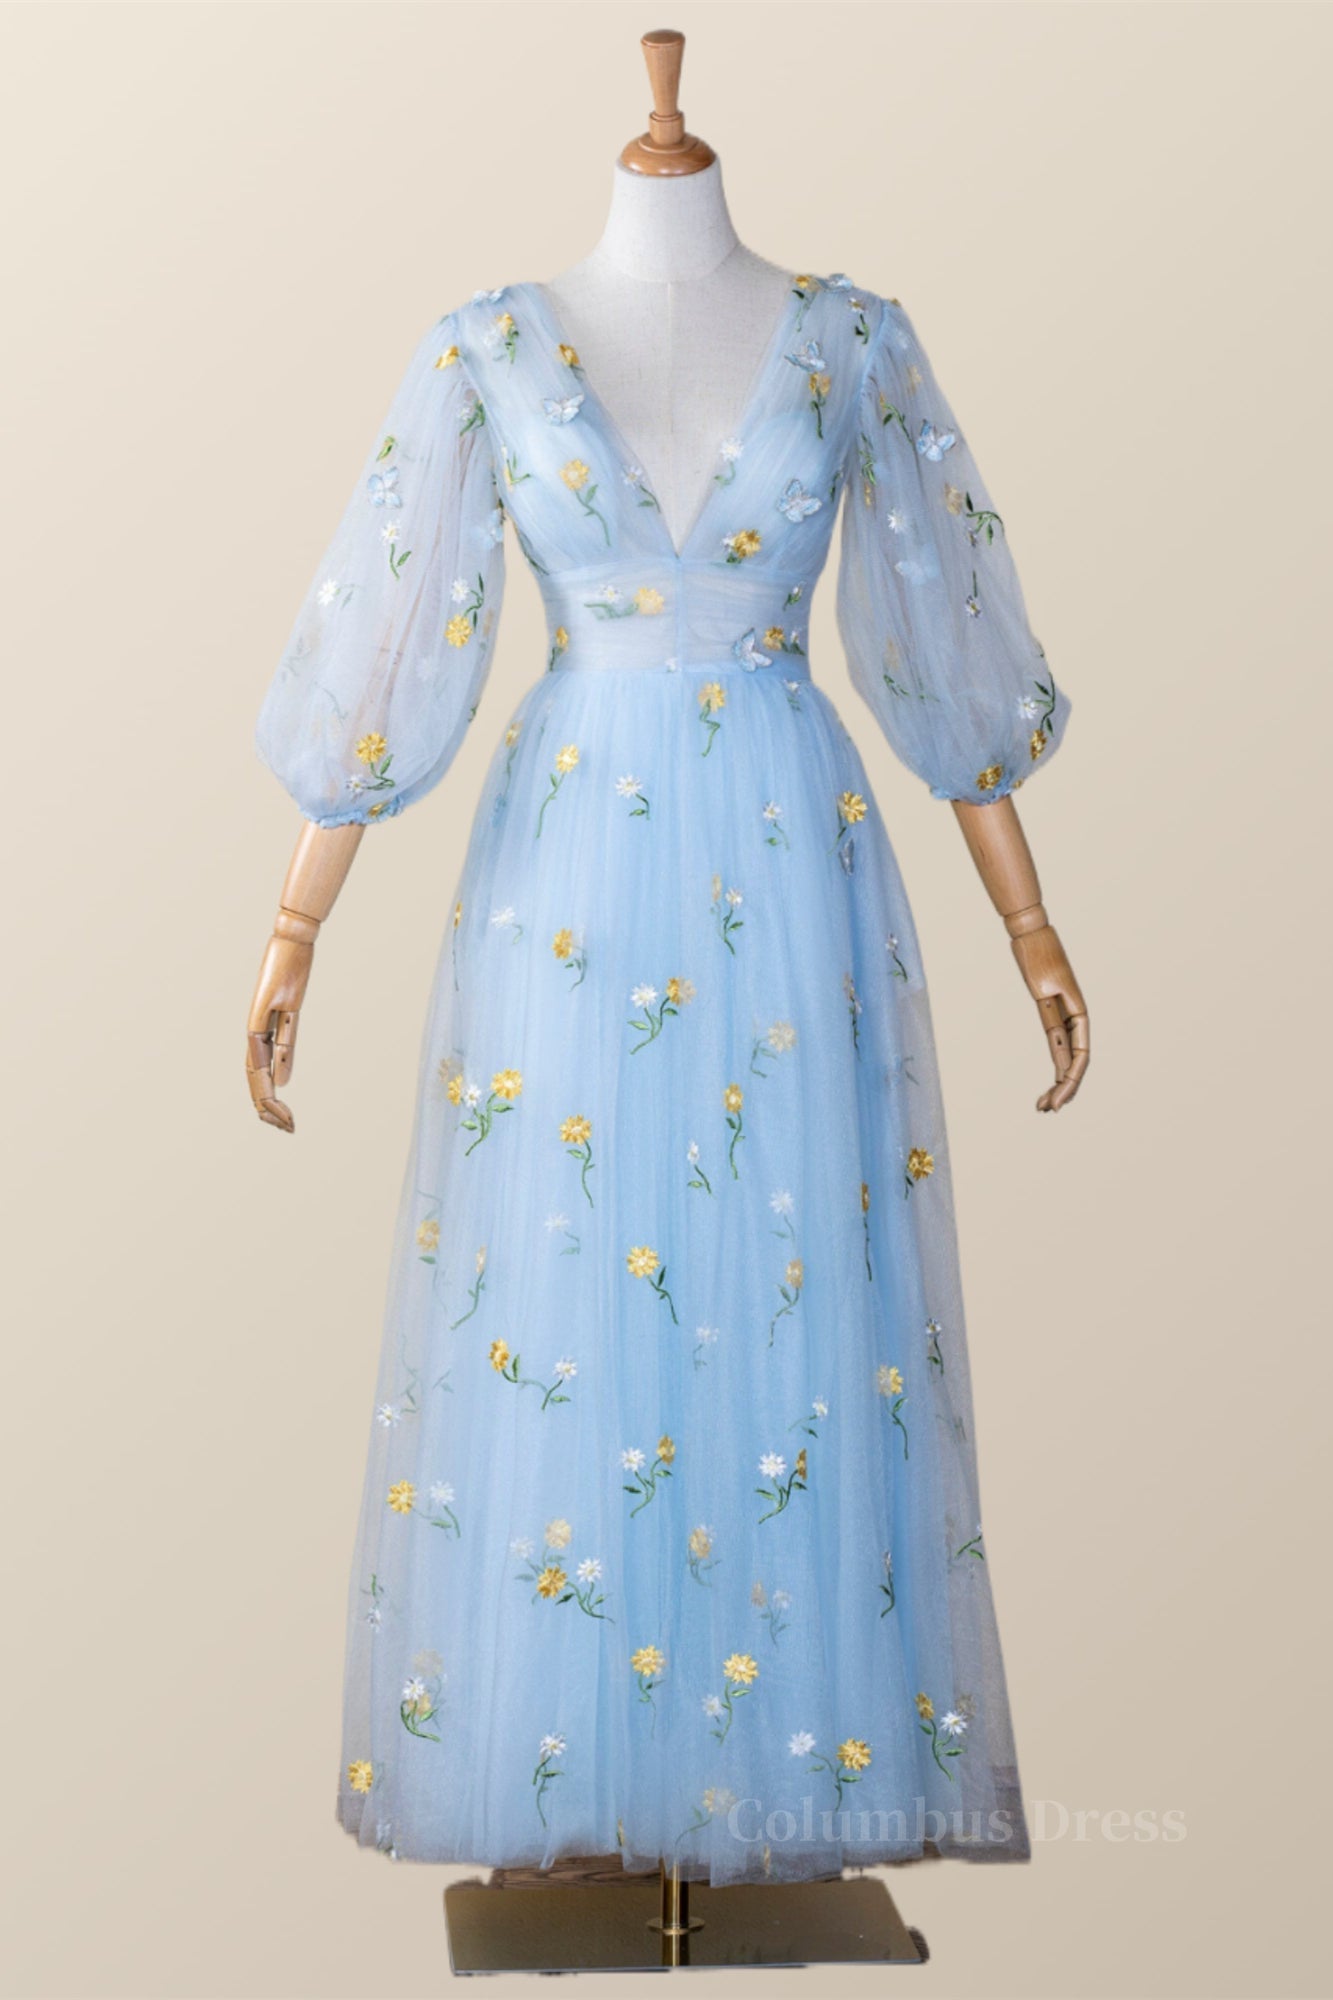 Evening Dresses For Wedding Guest, Blue and Yellow Daisy Floral Tea Length Dress